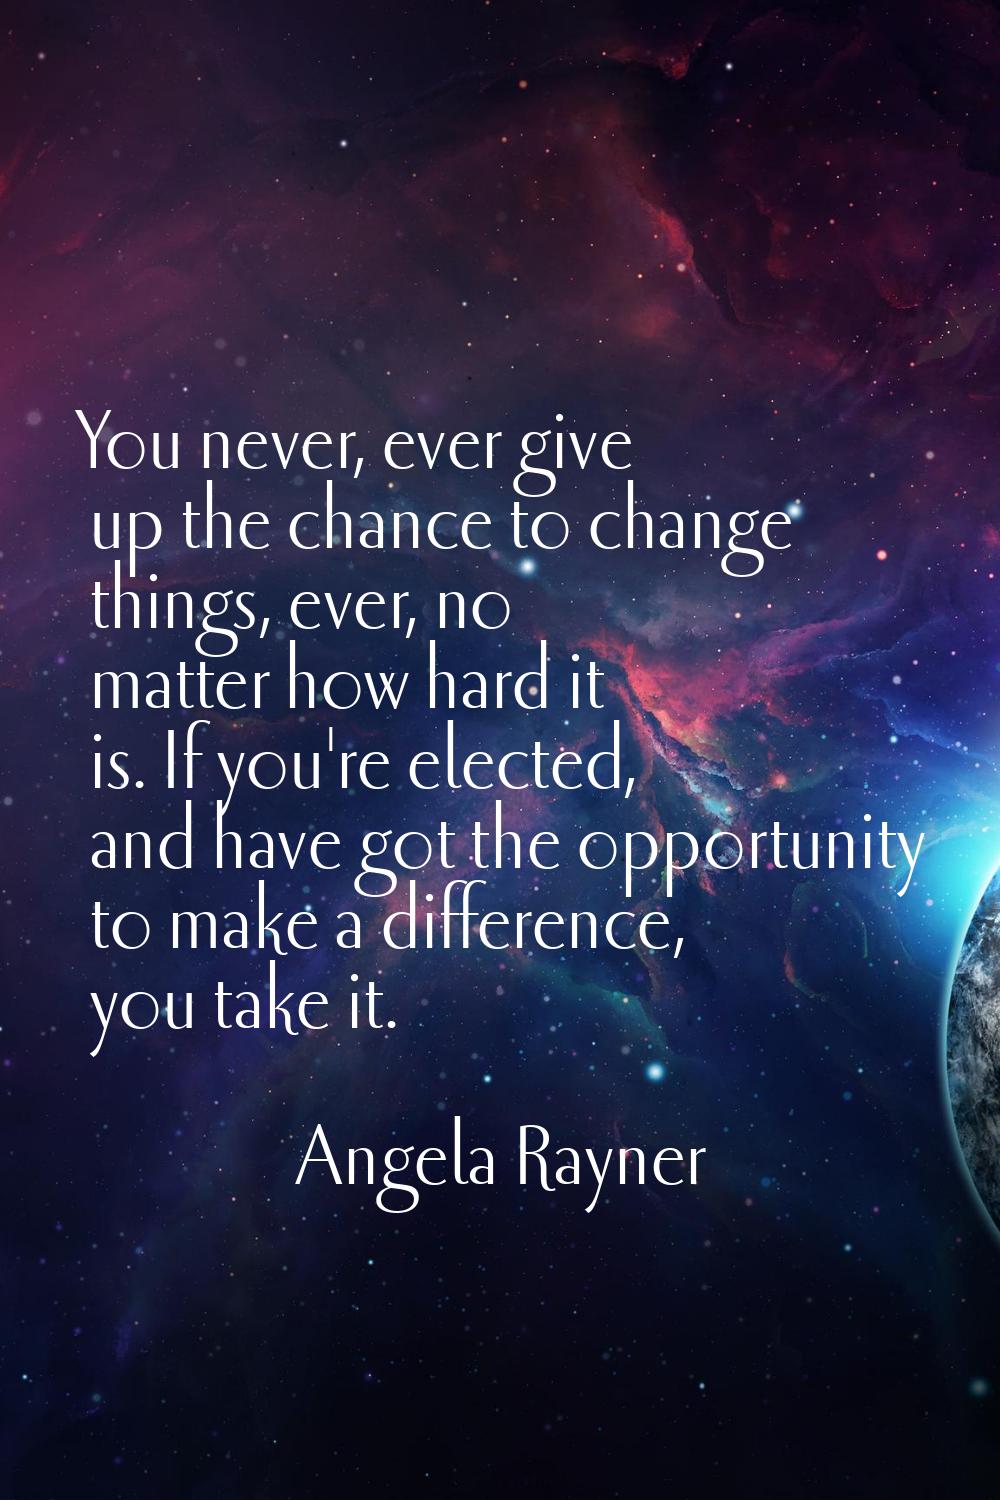 You never, ever give up the chance to change things, ever, no matter how hard it is. If you're elec